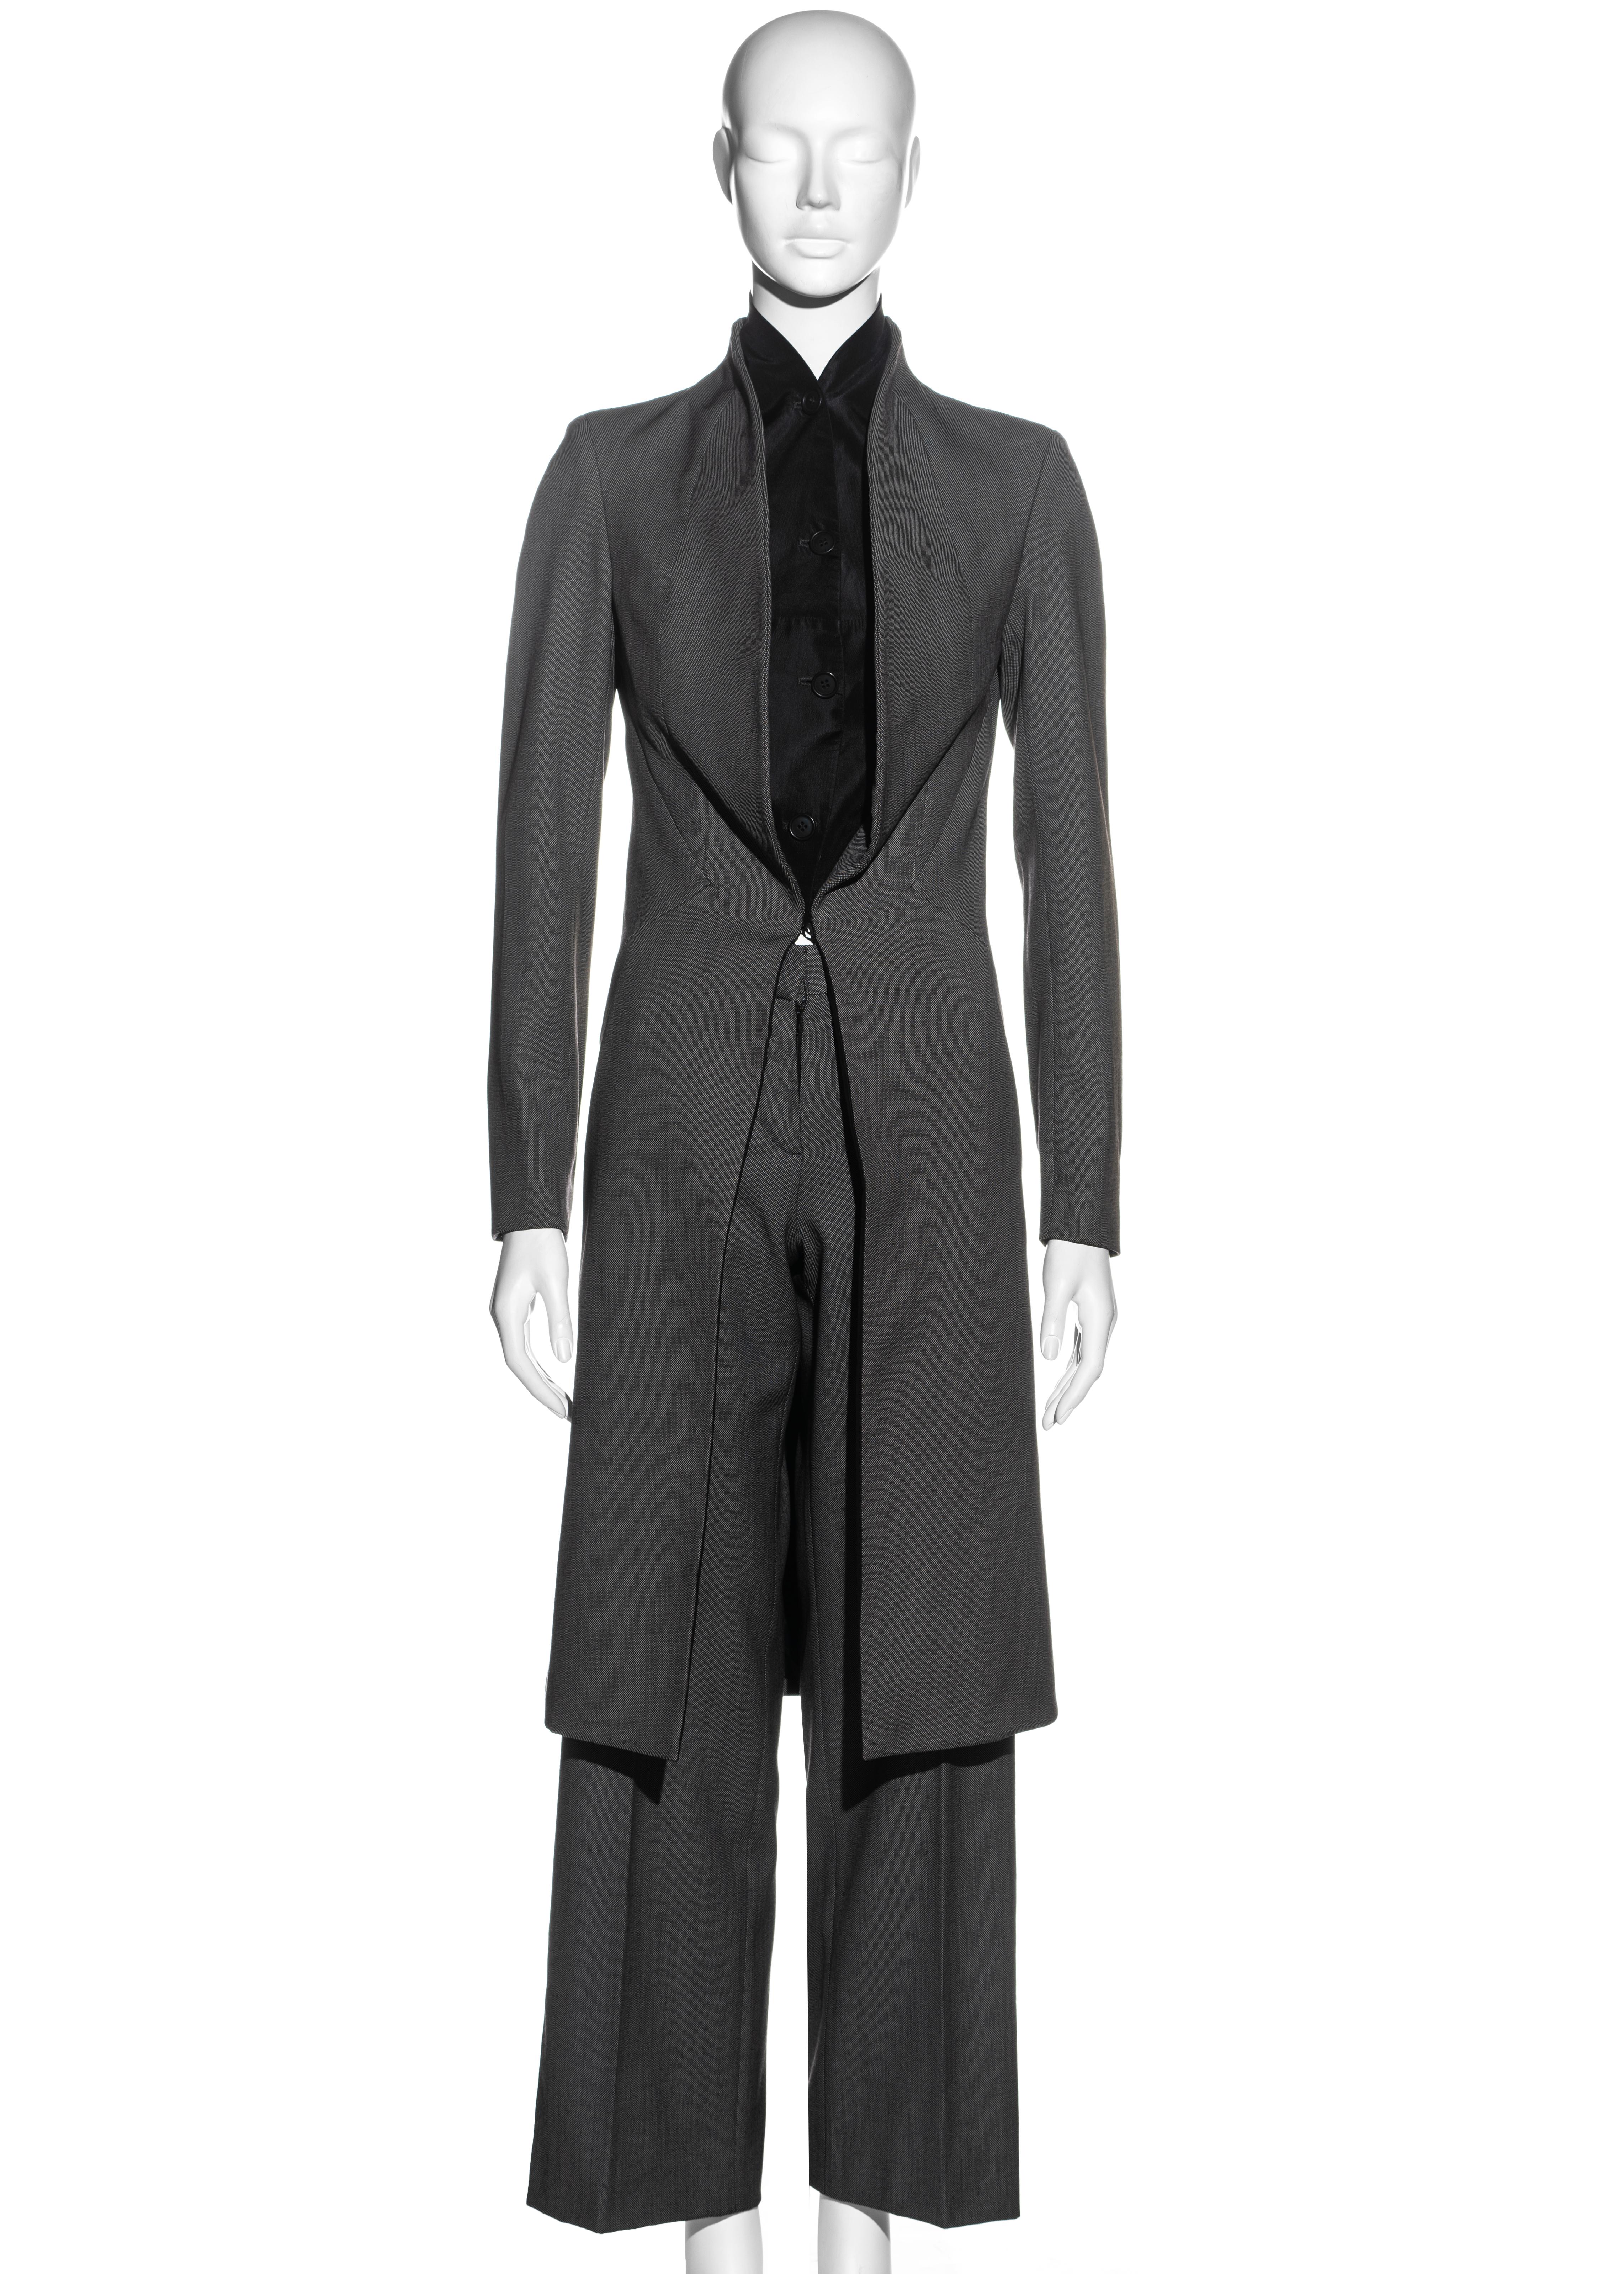 ▪ Alexander McQueen grey structured pant suit 
▪ Outer: 100% Wool, Lining: 100% Silk 
▪ Mid-length fitted jacket 
▪ Diamond cut panels to bodice 
▪ Standing shawl lapel 
▪ Metal hook closure at waist 
▪ Built-in black silk button-up panel at bust 
▪